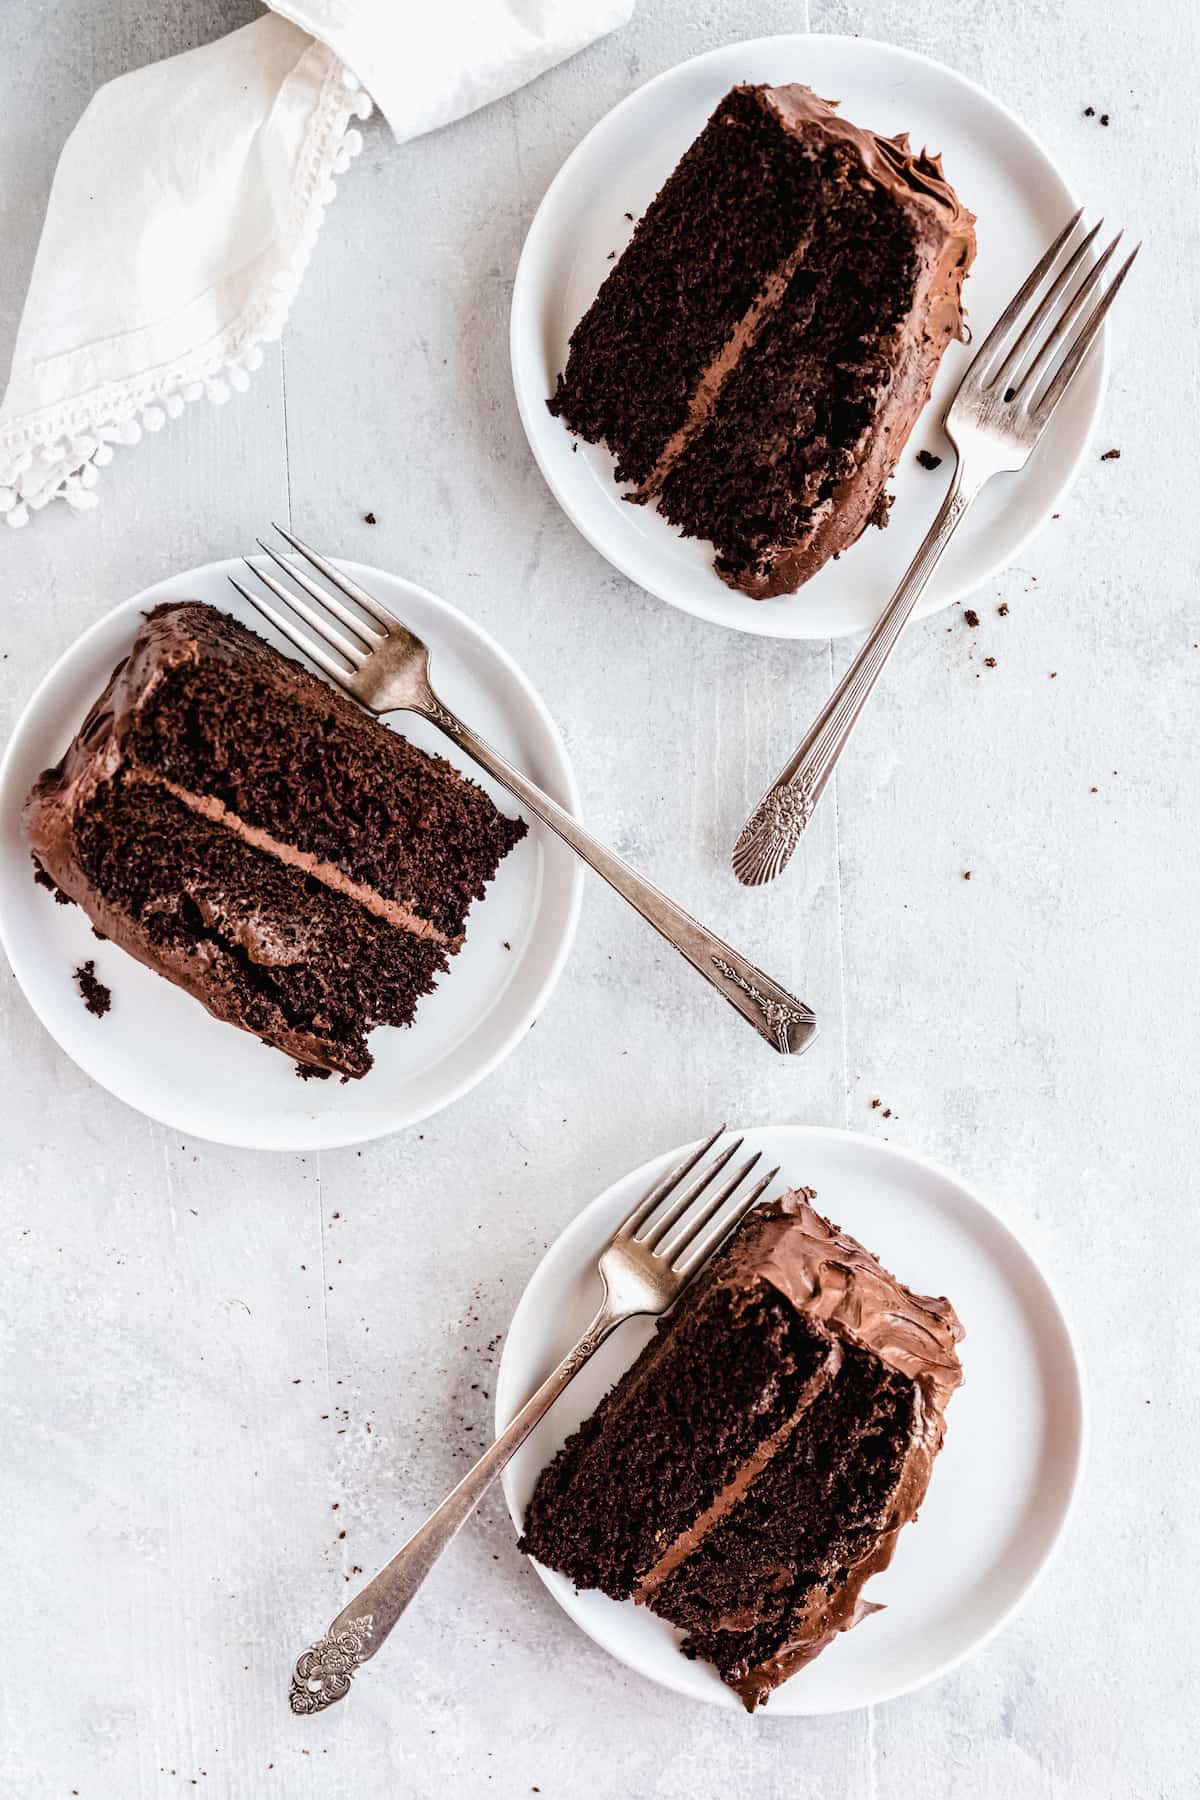 A Bird's-Eye View of Three Slices of Homemade Chocolate Layer Cake